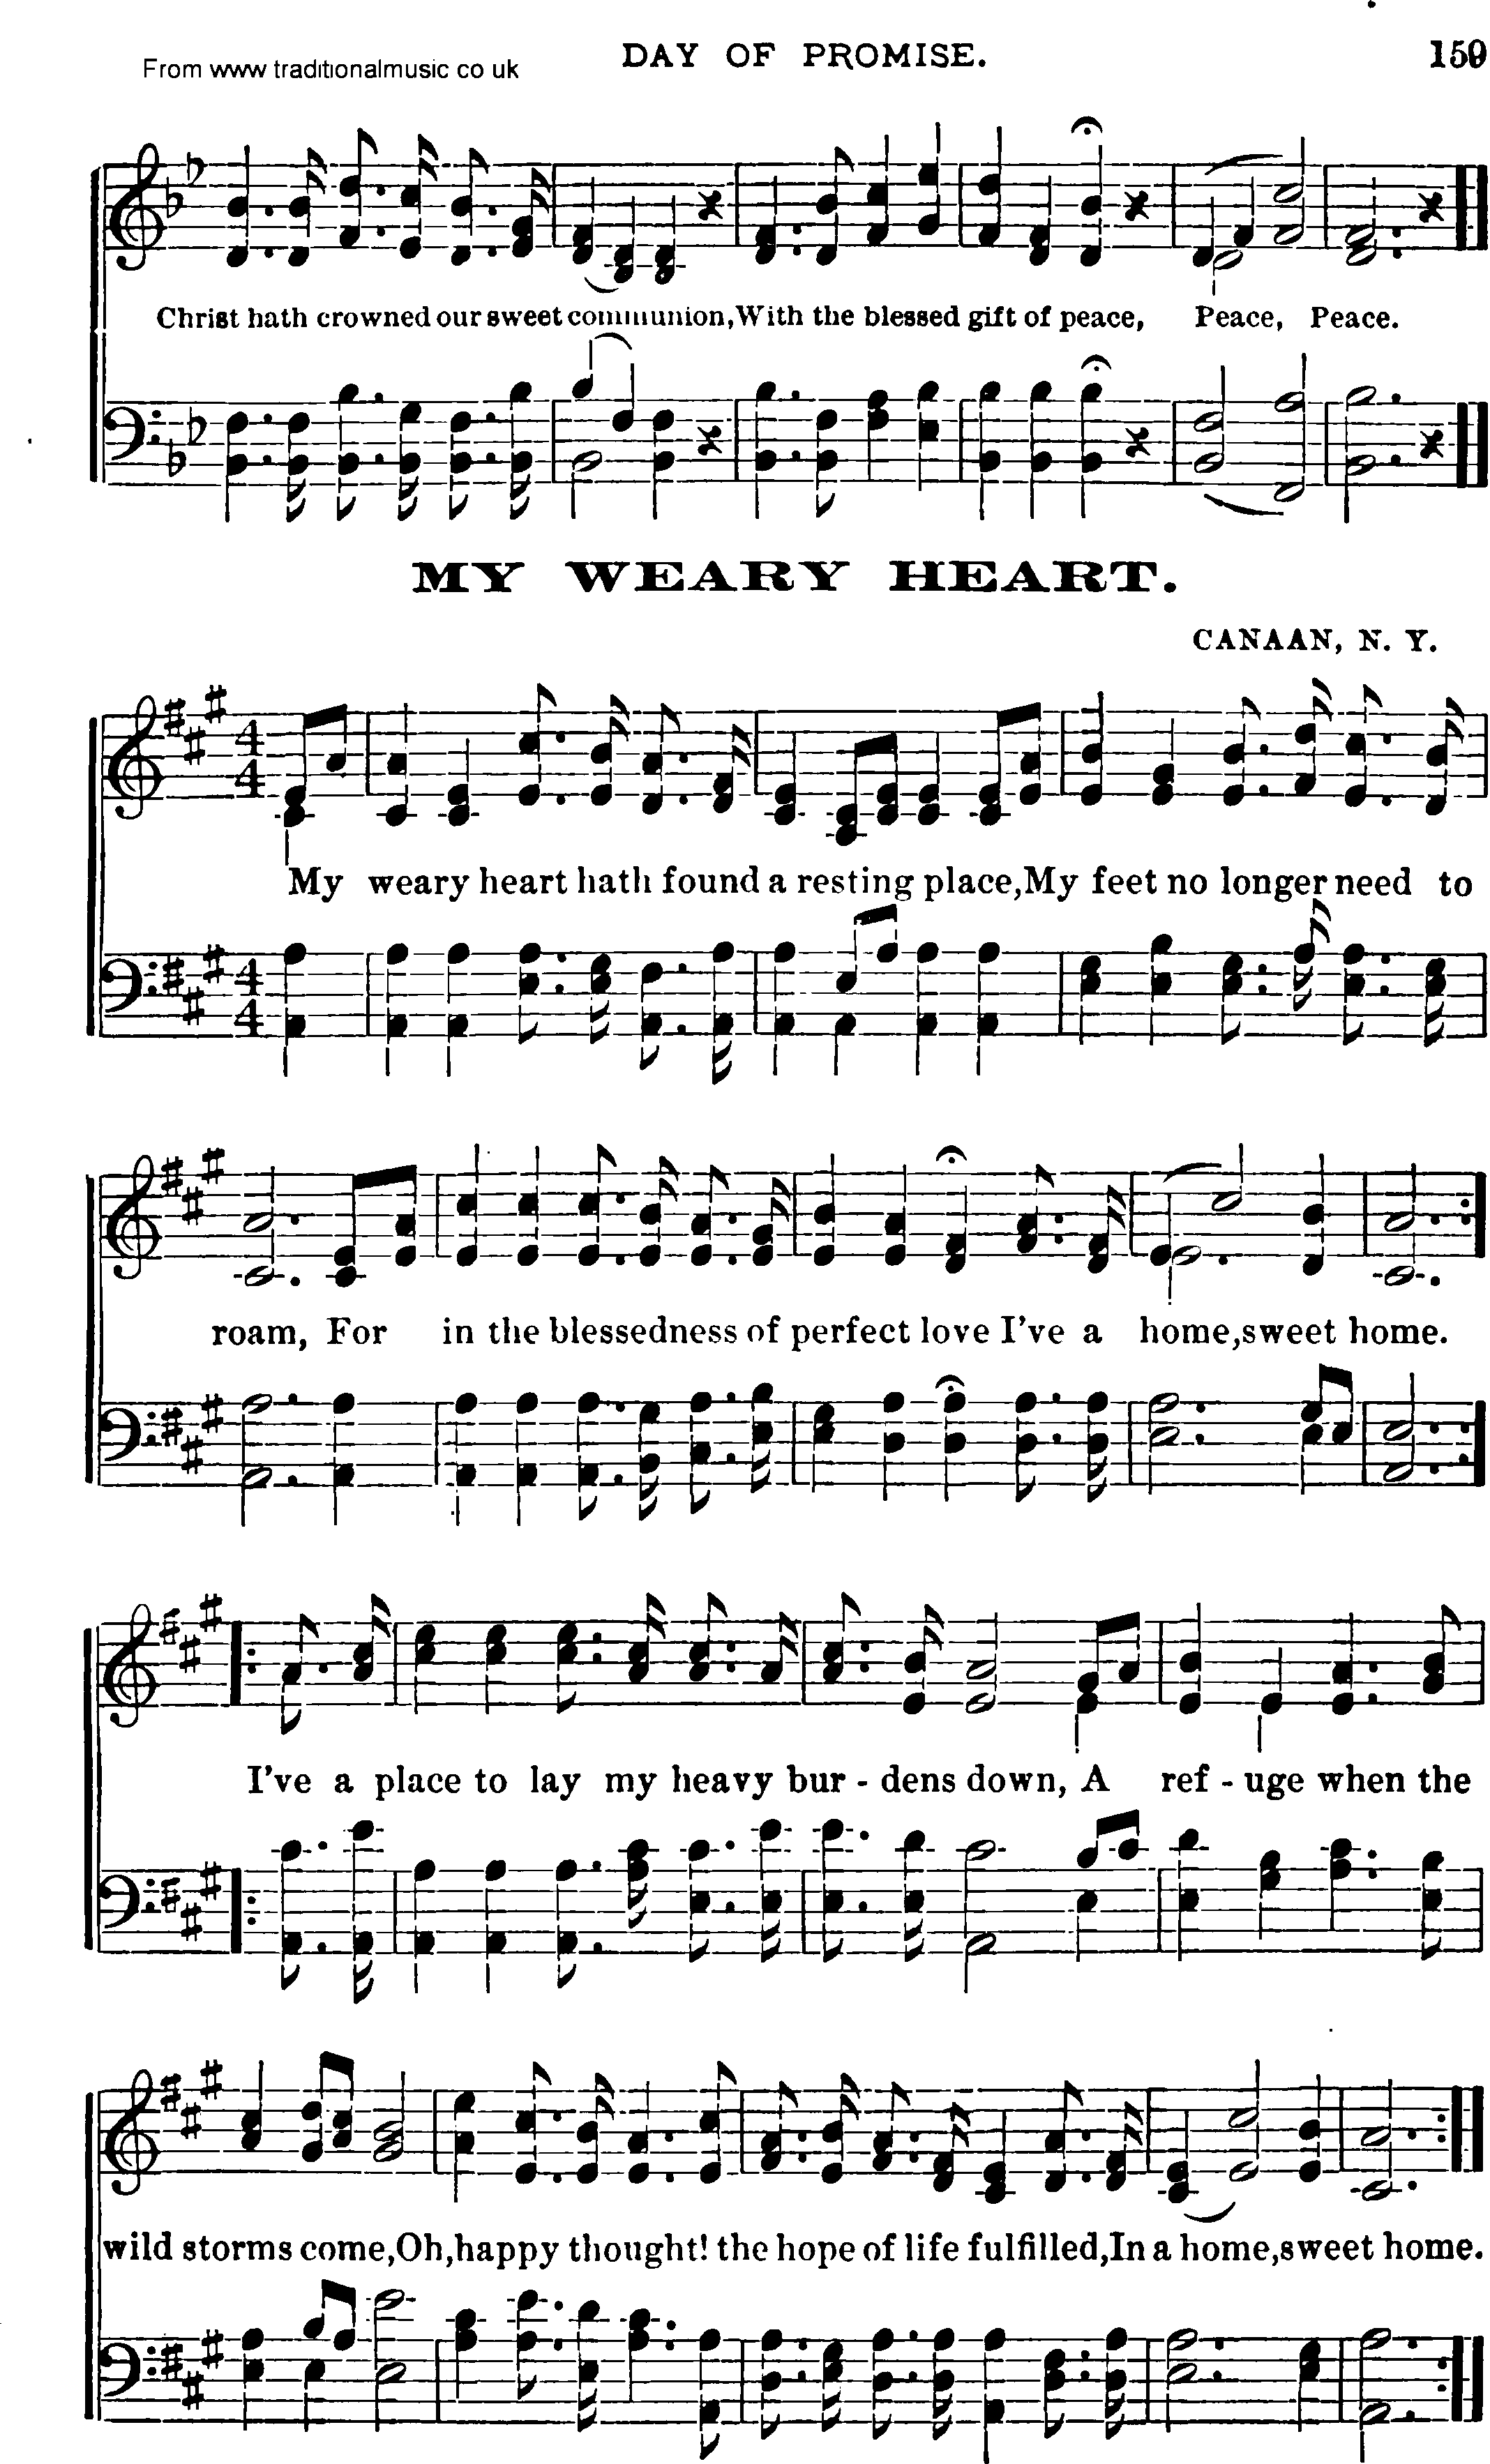 Shaker Music collection, Hymn: My Weary Heart, sheetmusic and PDF